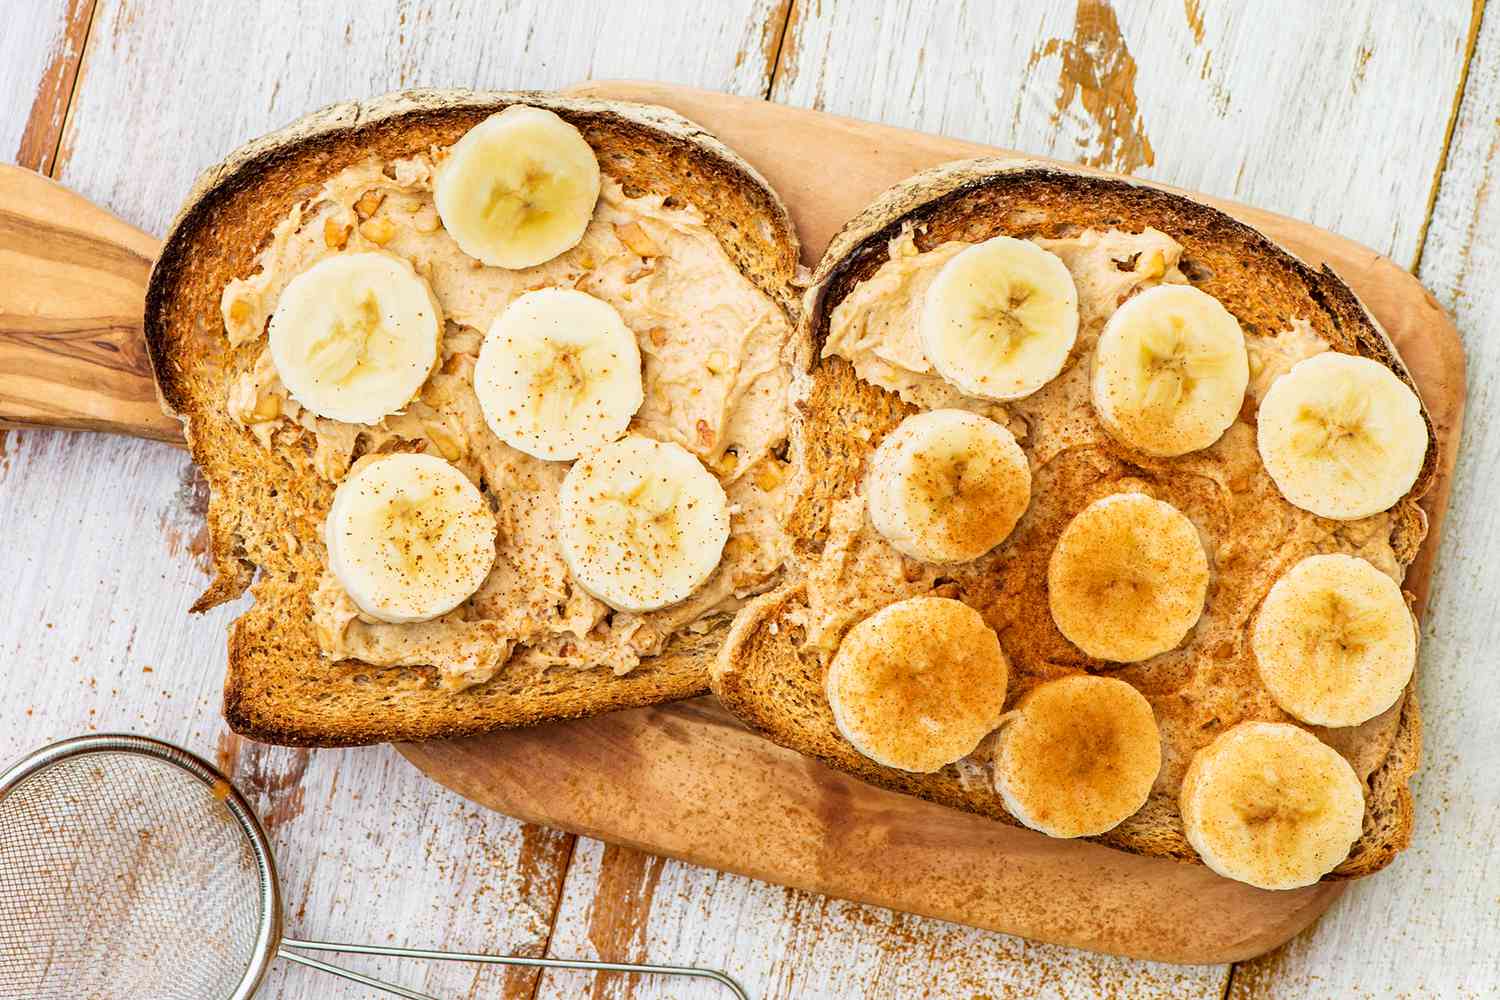 Toasts from Wholewheat Bread with Peanut Butter and Banana and cinnamon